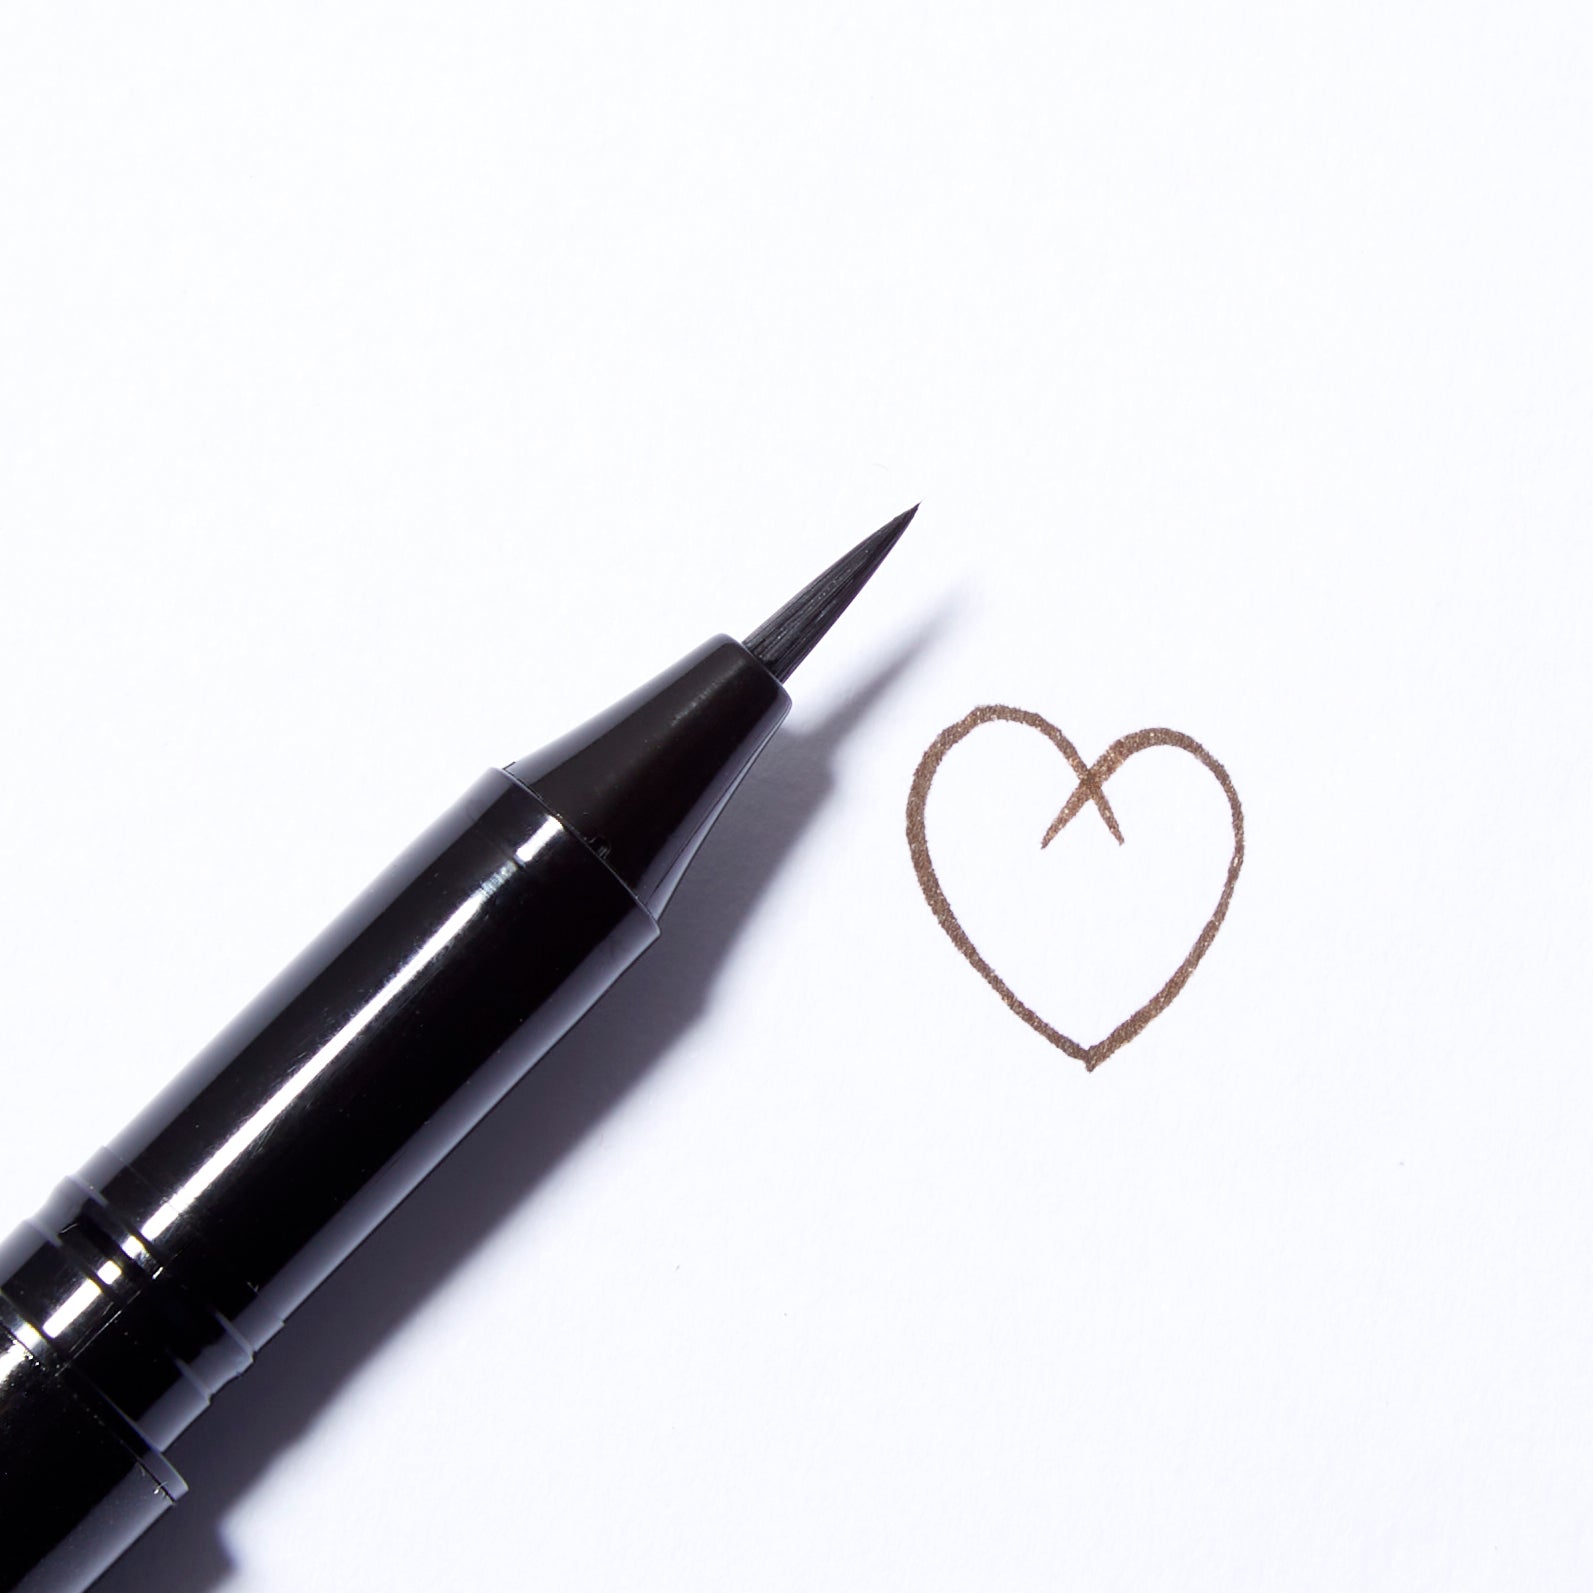  A close up of the Surratt Autographique Liquid Eyeliner in Brun Riche, a rich brown. The pen is made of individual hairs and goes to a sharp point. The pen is angled and there is a heart drawn to the right of it in the ink from the eyeliner.